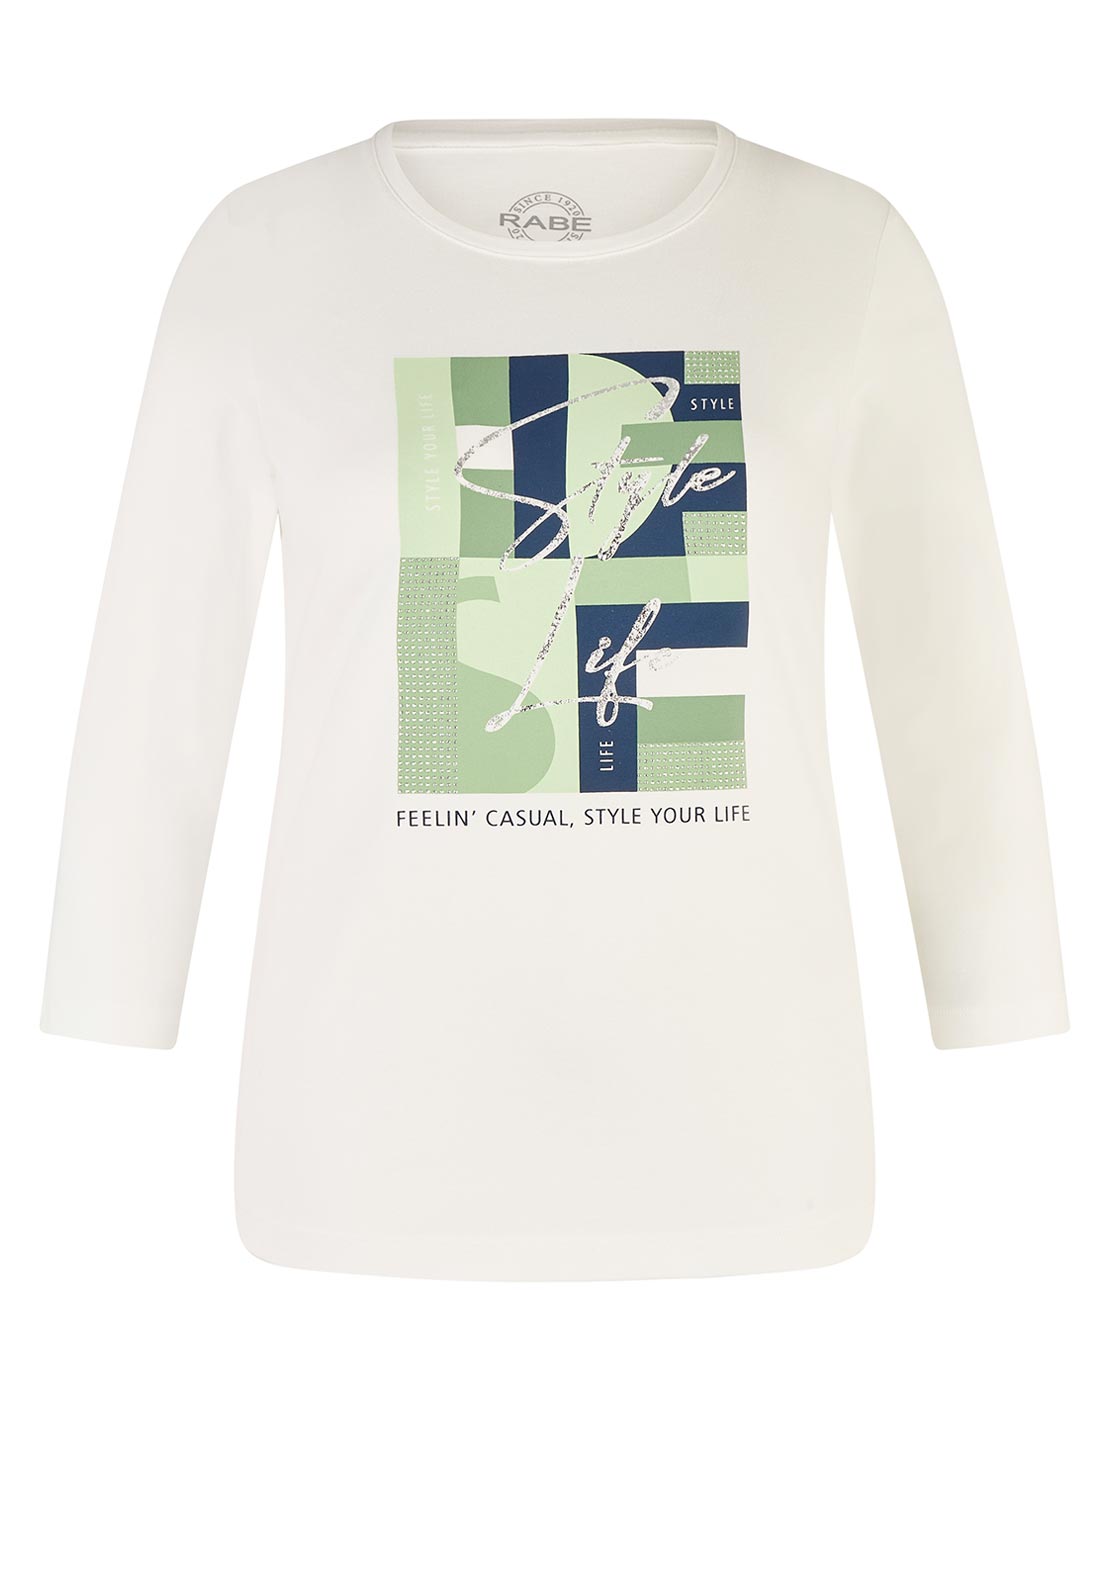 Your White Graphic Rabe T-Shirt, - McElhinneys Style Off Life